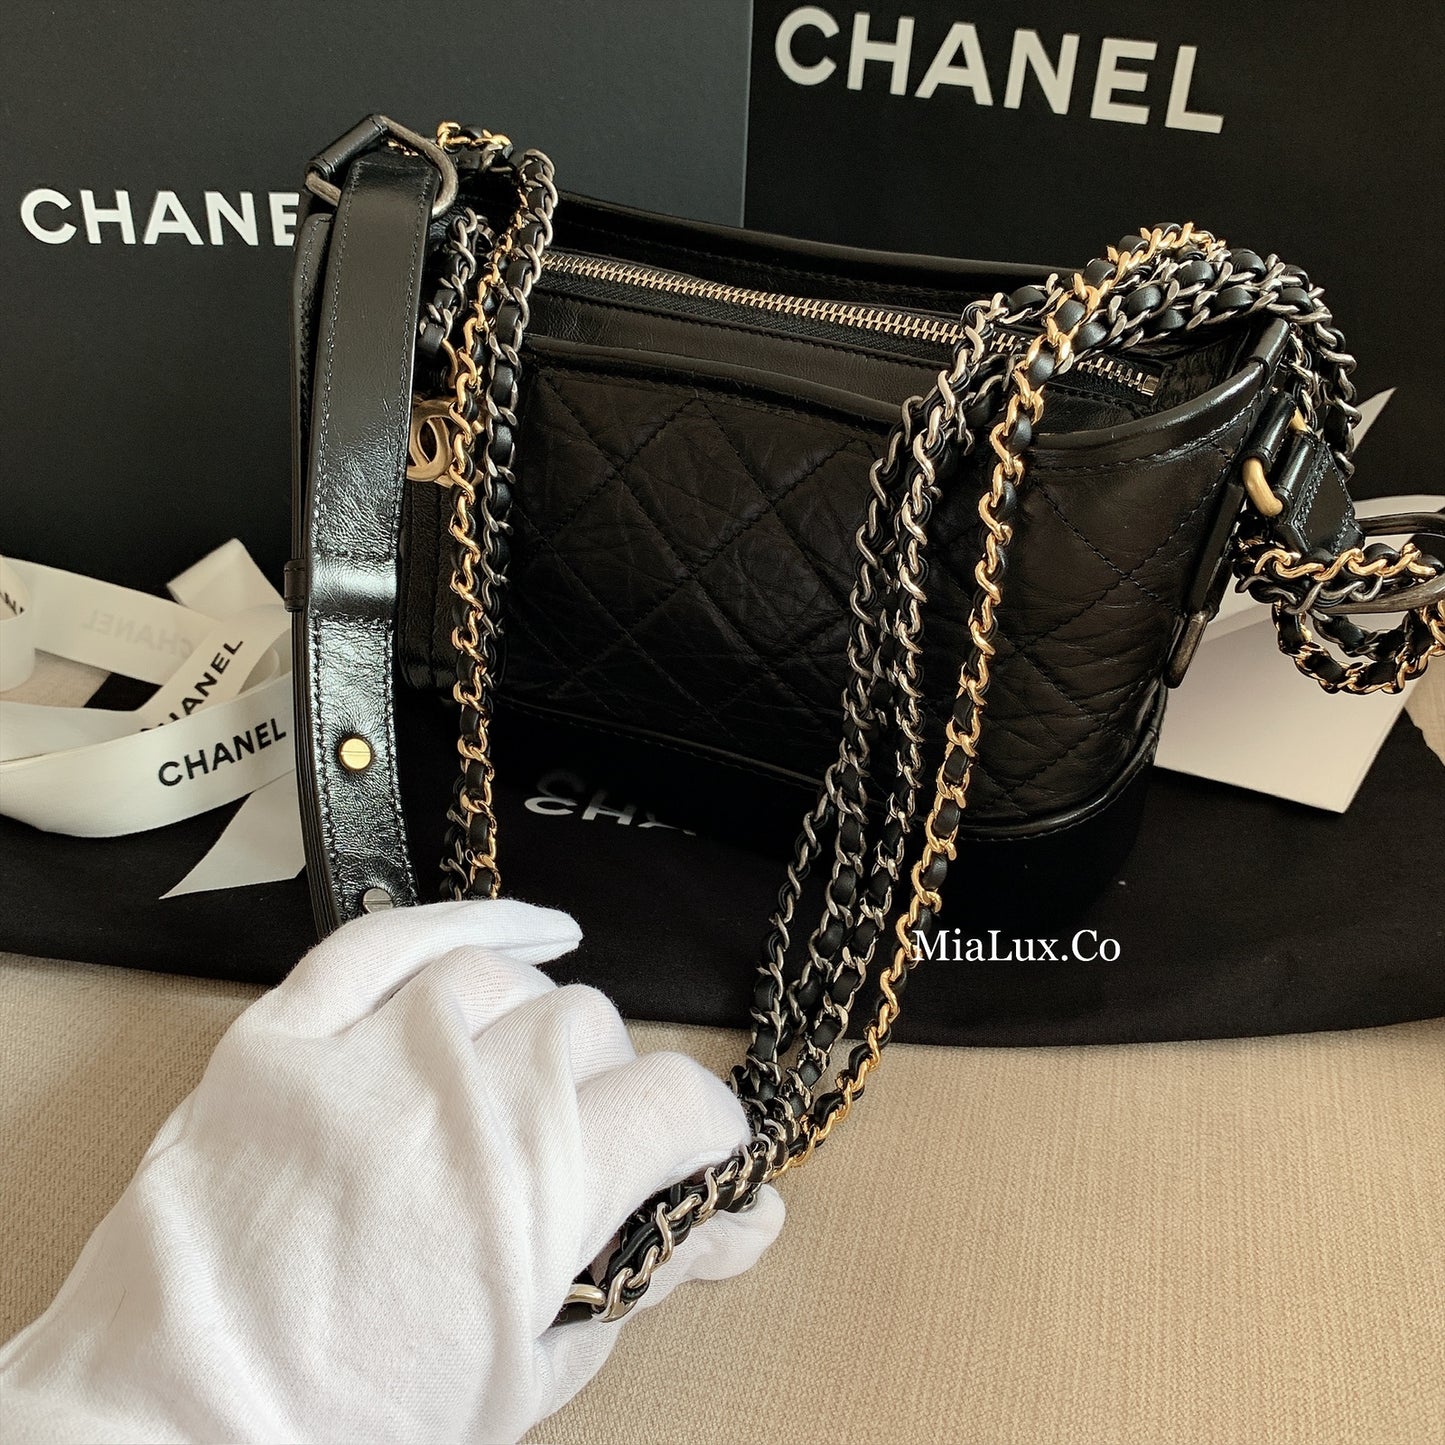 CHANEL▶︎| SMALL GABRIELLE HOBO 小款流浪包 A91810 -